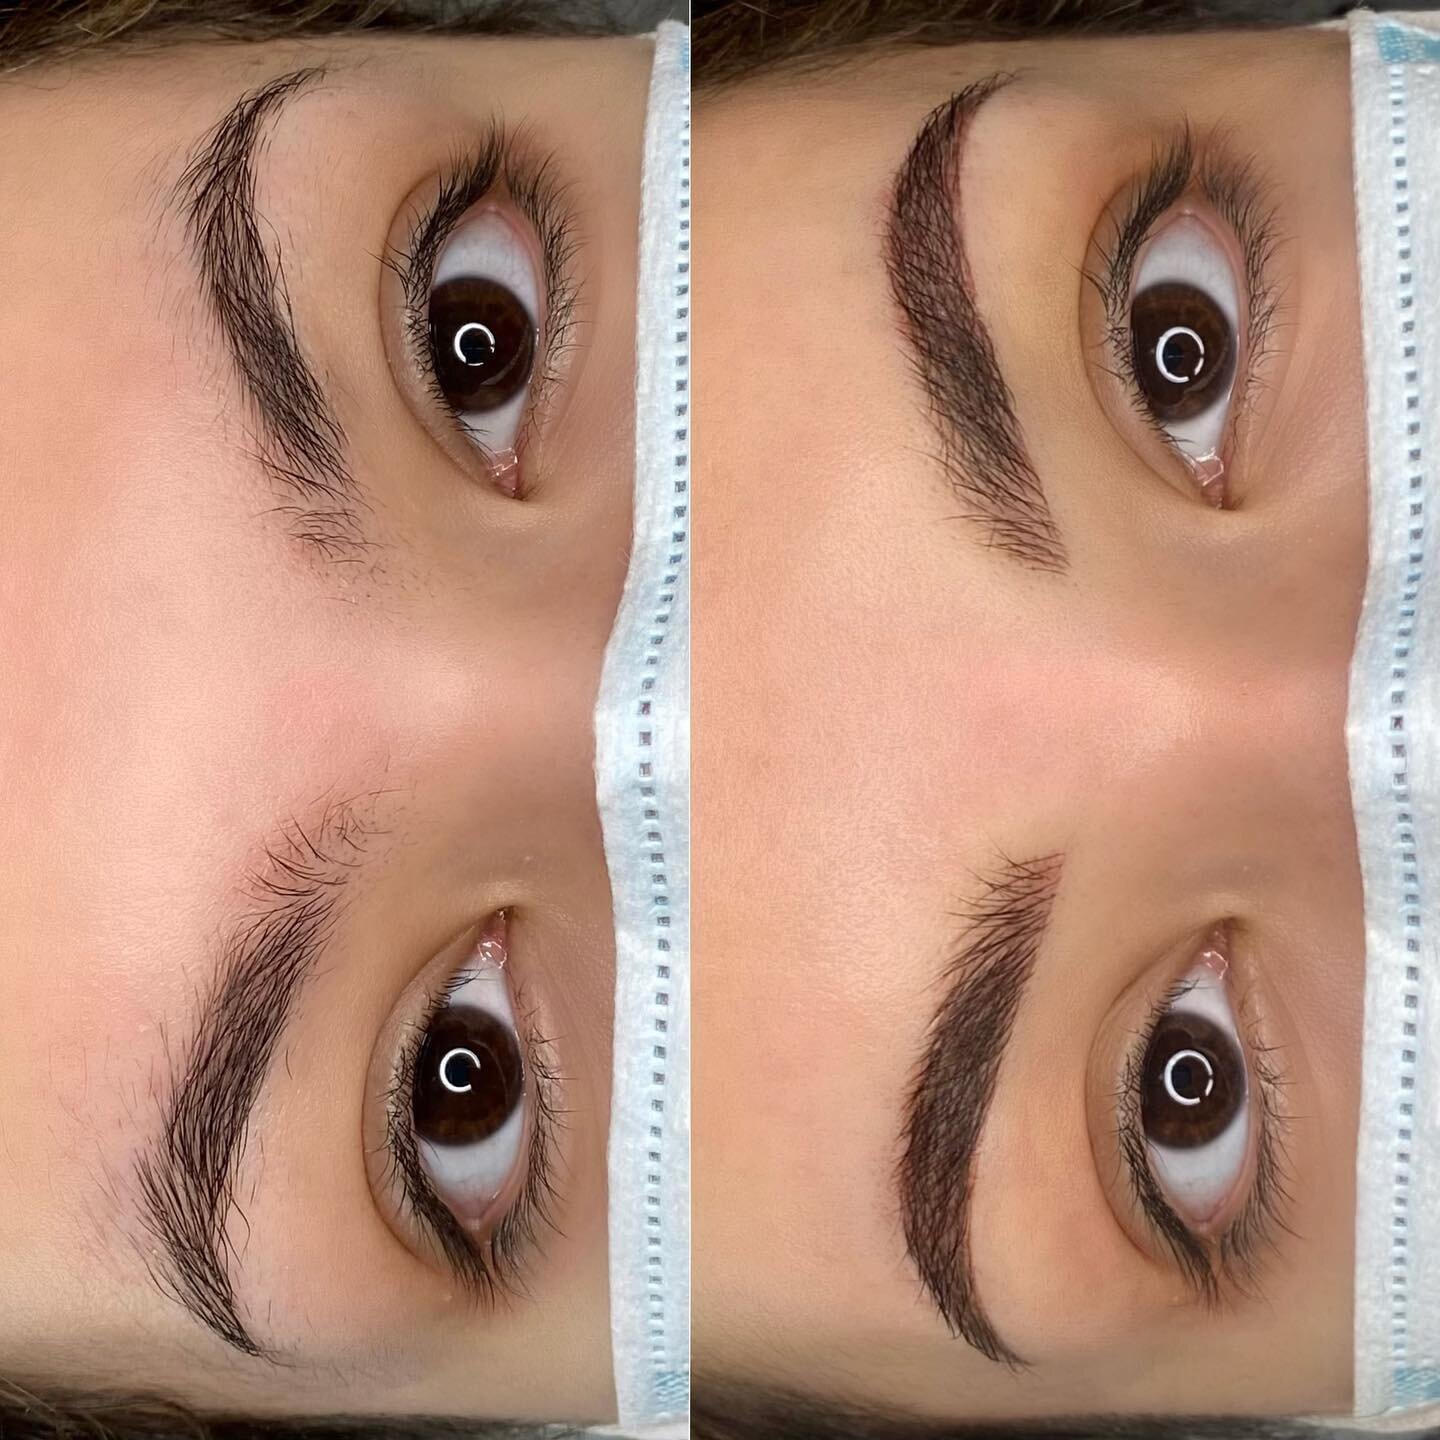 NANO BROWS for the win! 🤩 My client wanted a clean natural look with some volume in her tail. 

She didn't like how her left brow sat higher than her right and how her front dipped lower than she would like. 

We worked some nano magic on my beautif